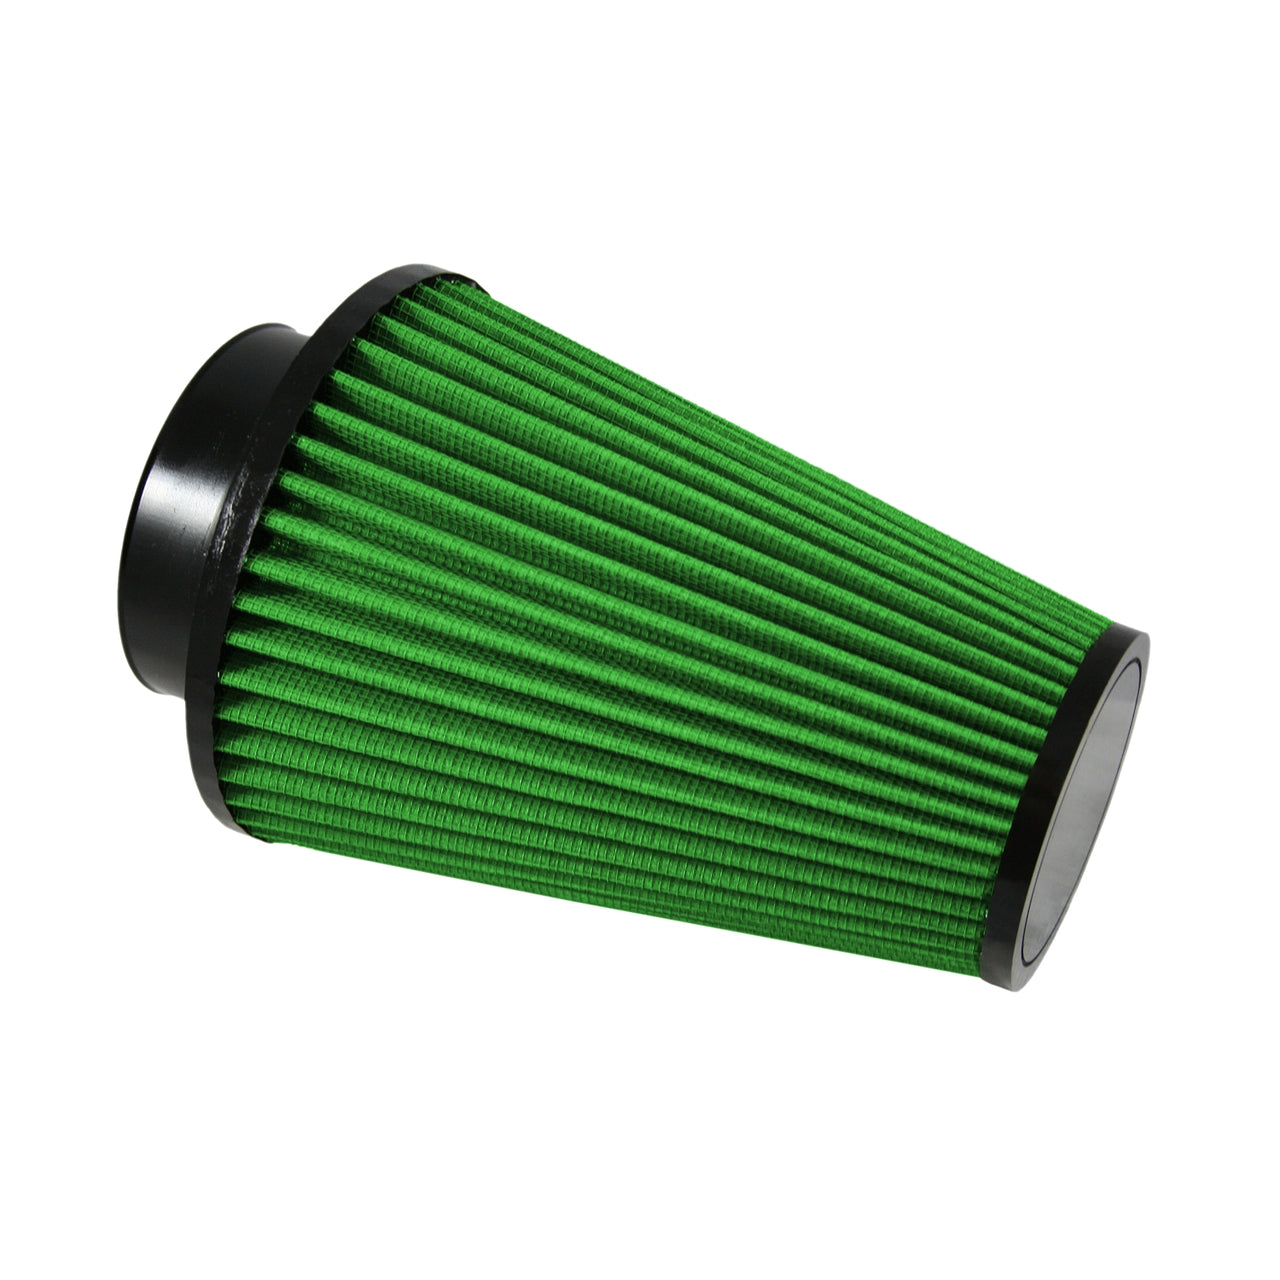 Green Filter Cone Filter - ID 3.5in. / Base 6in. / Top 3.5in. / H 8in. Radius Inlet